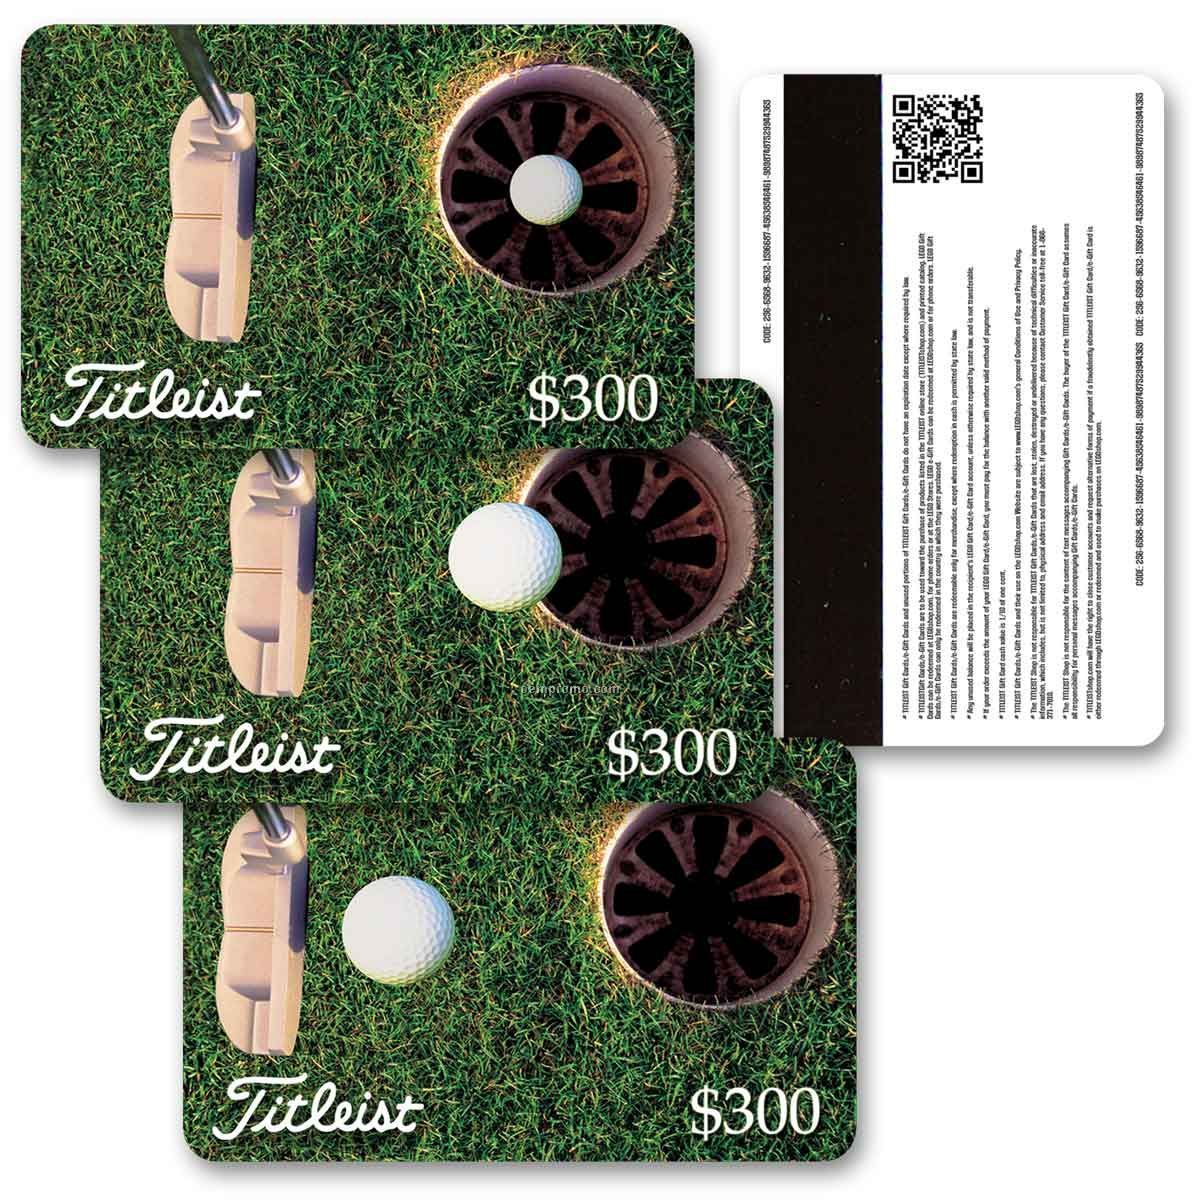 3d Lenticular Gift Card W/Animated Golf Putt Images (Imprinted)